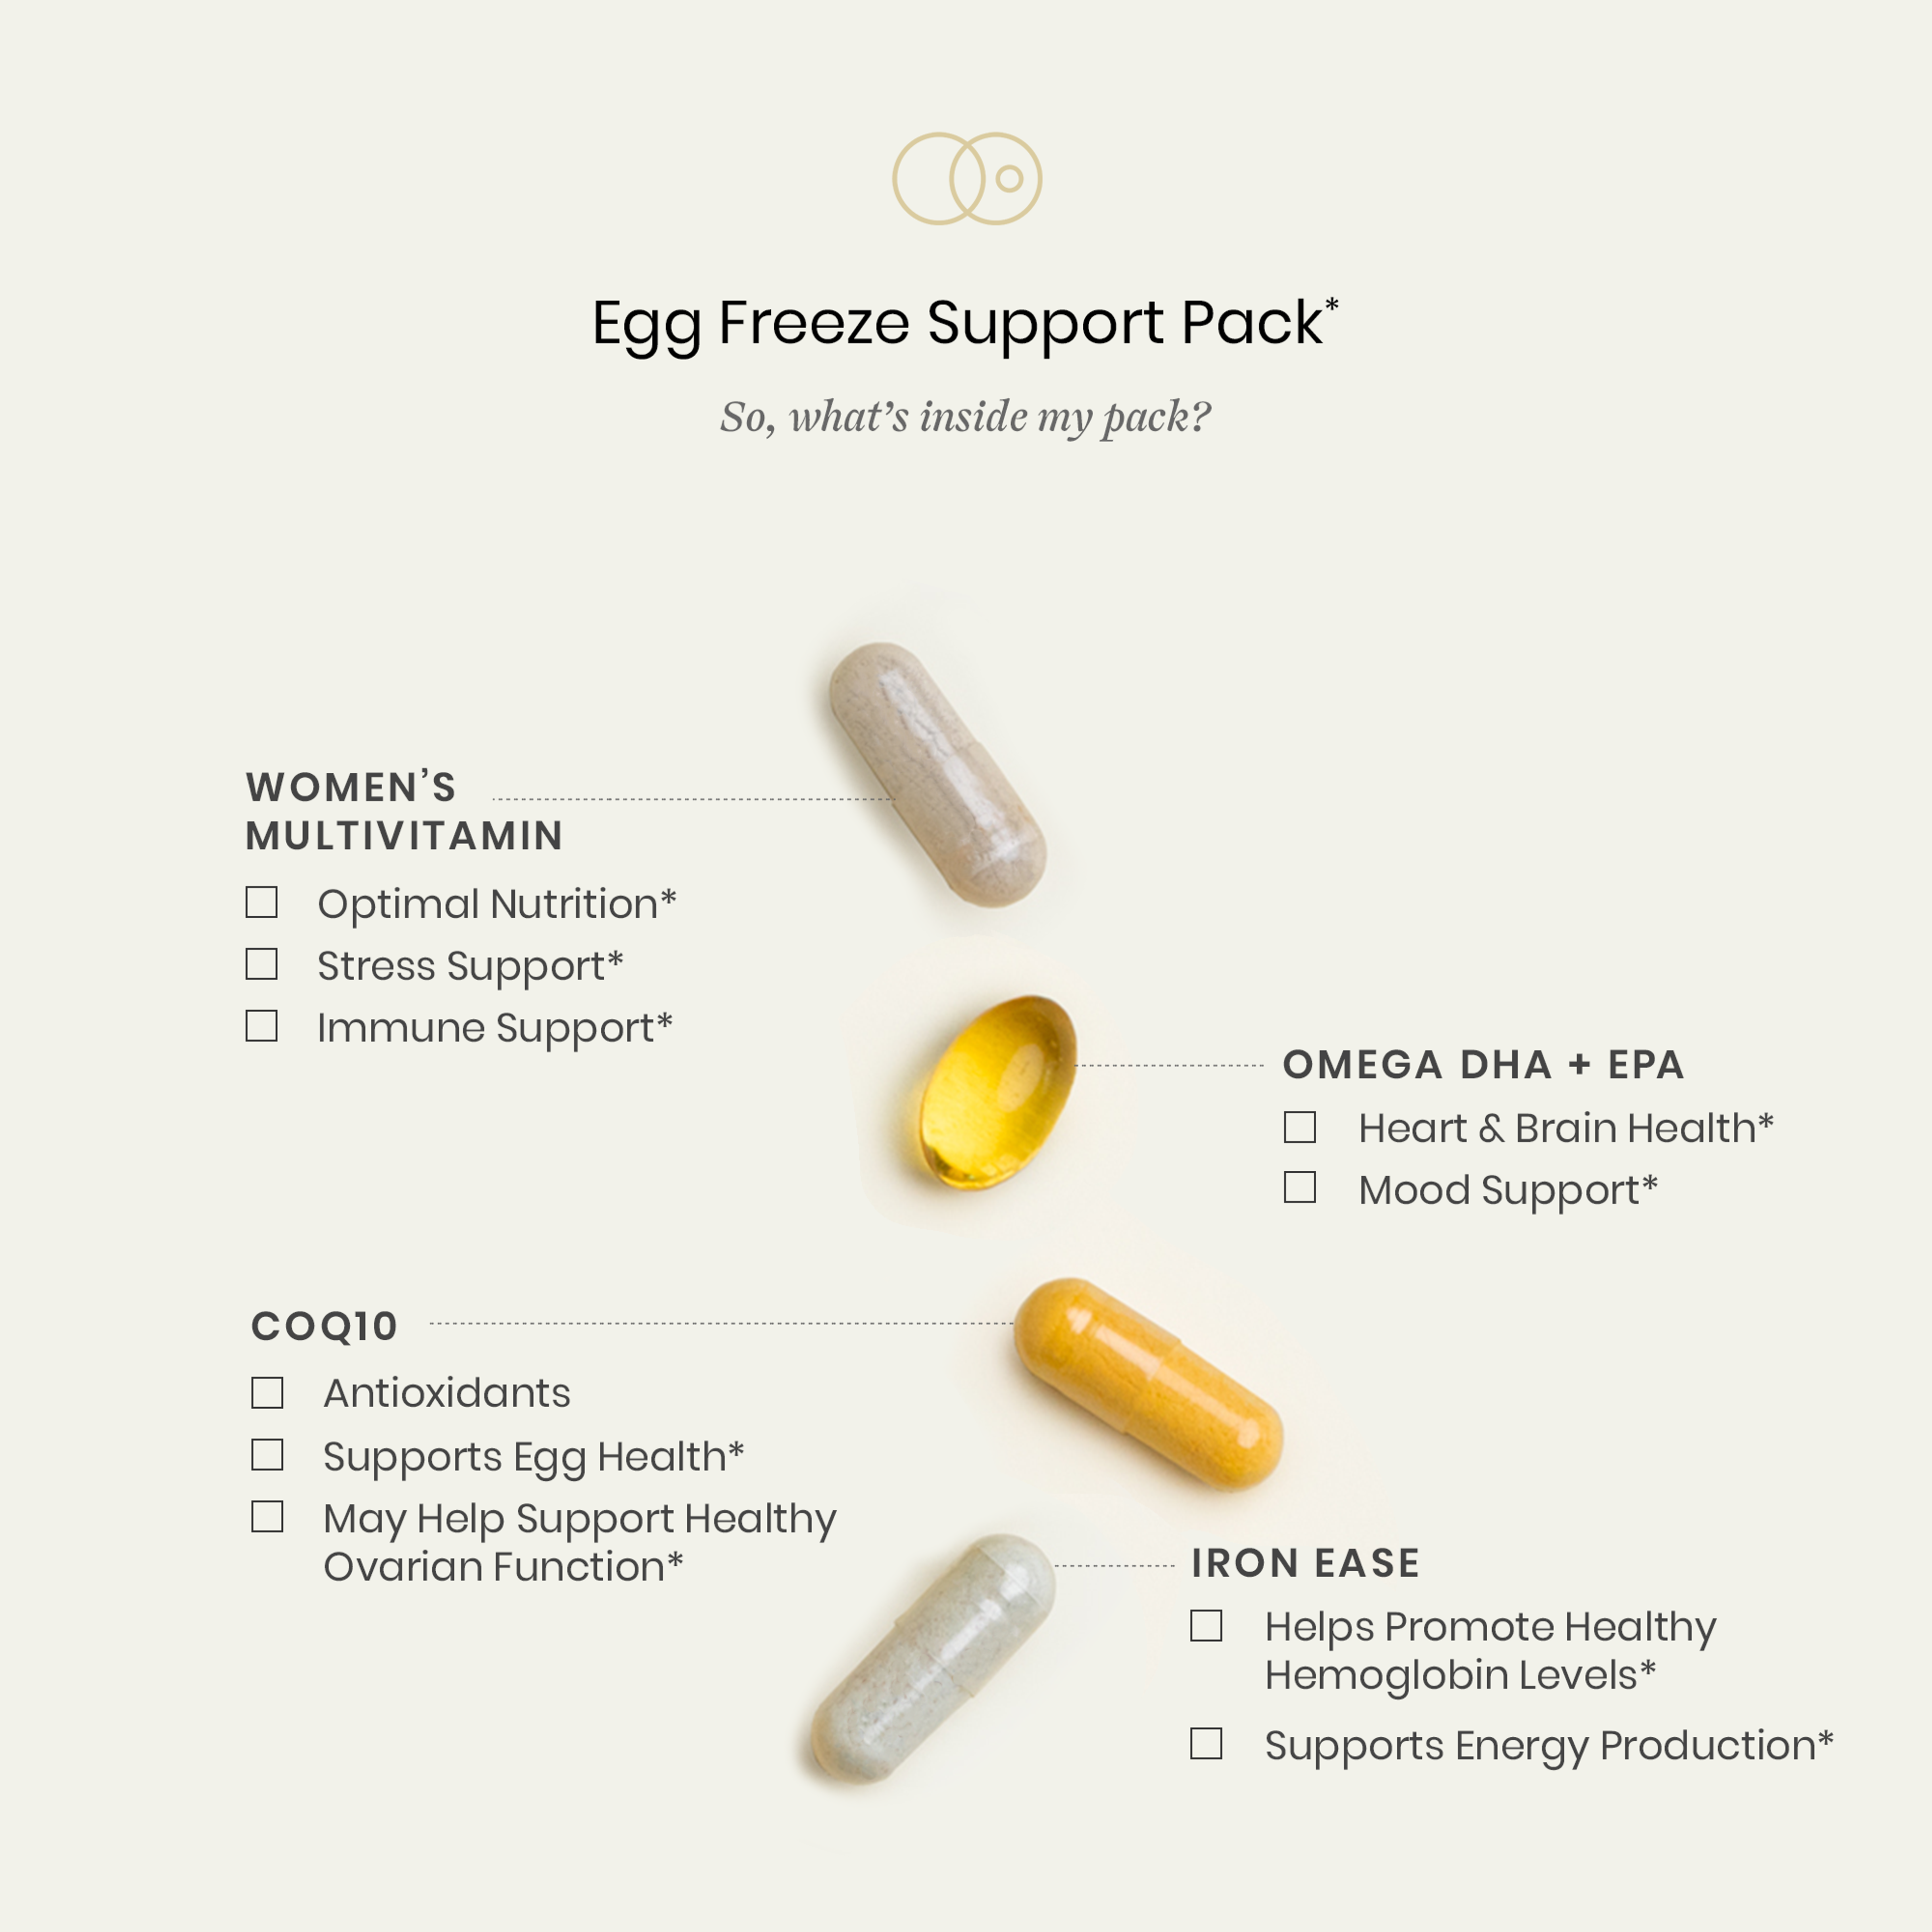 Egg Freeze Support Pack*